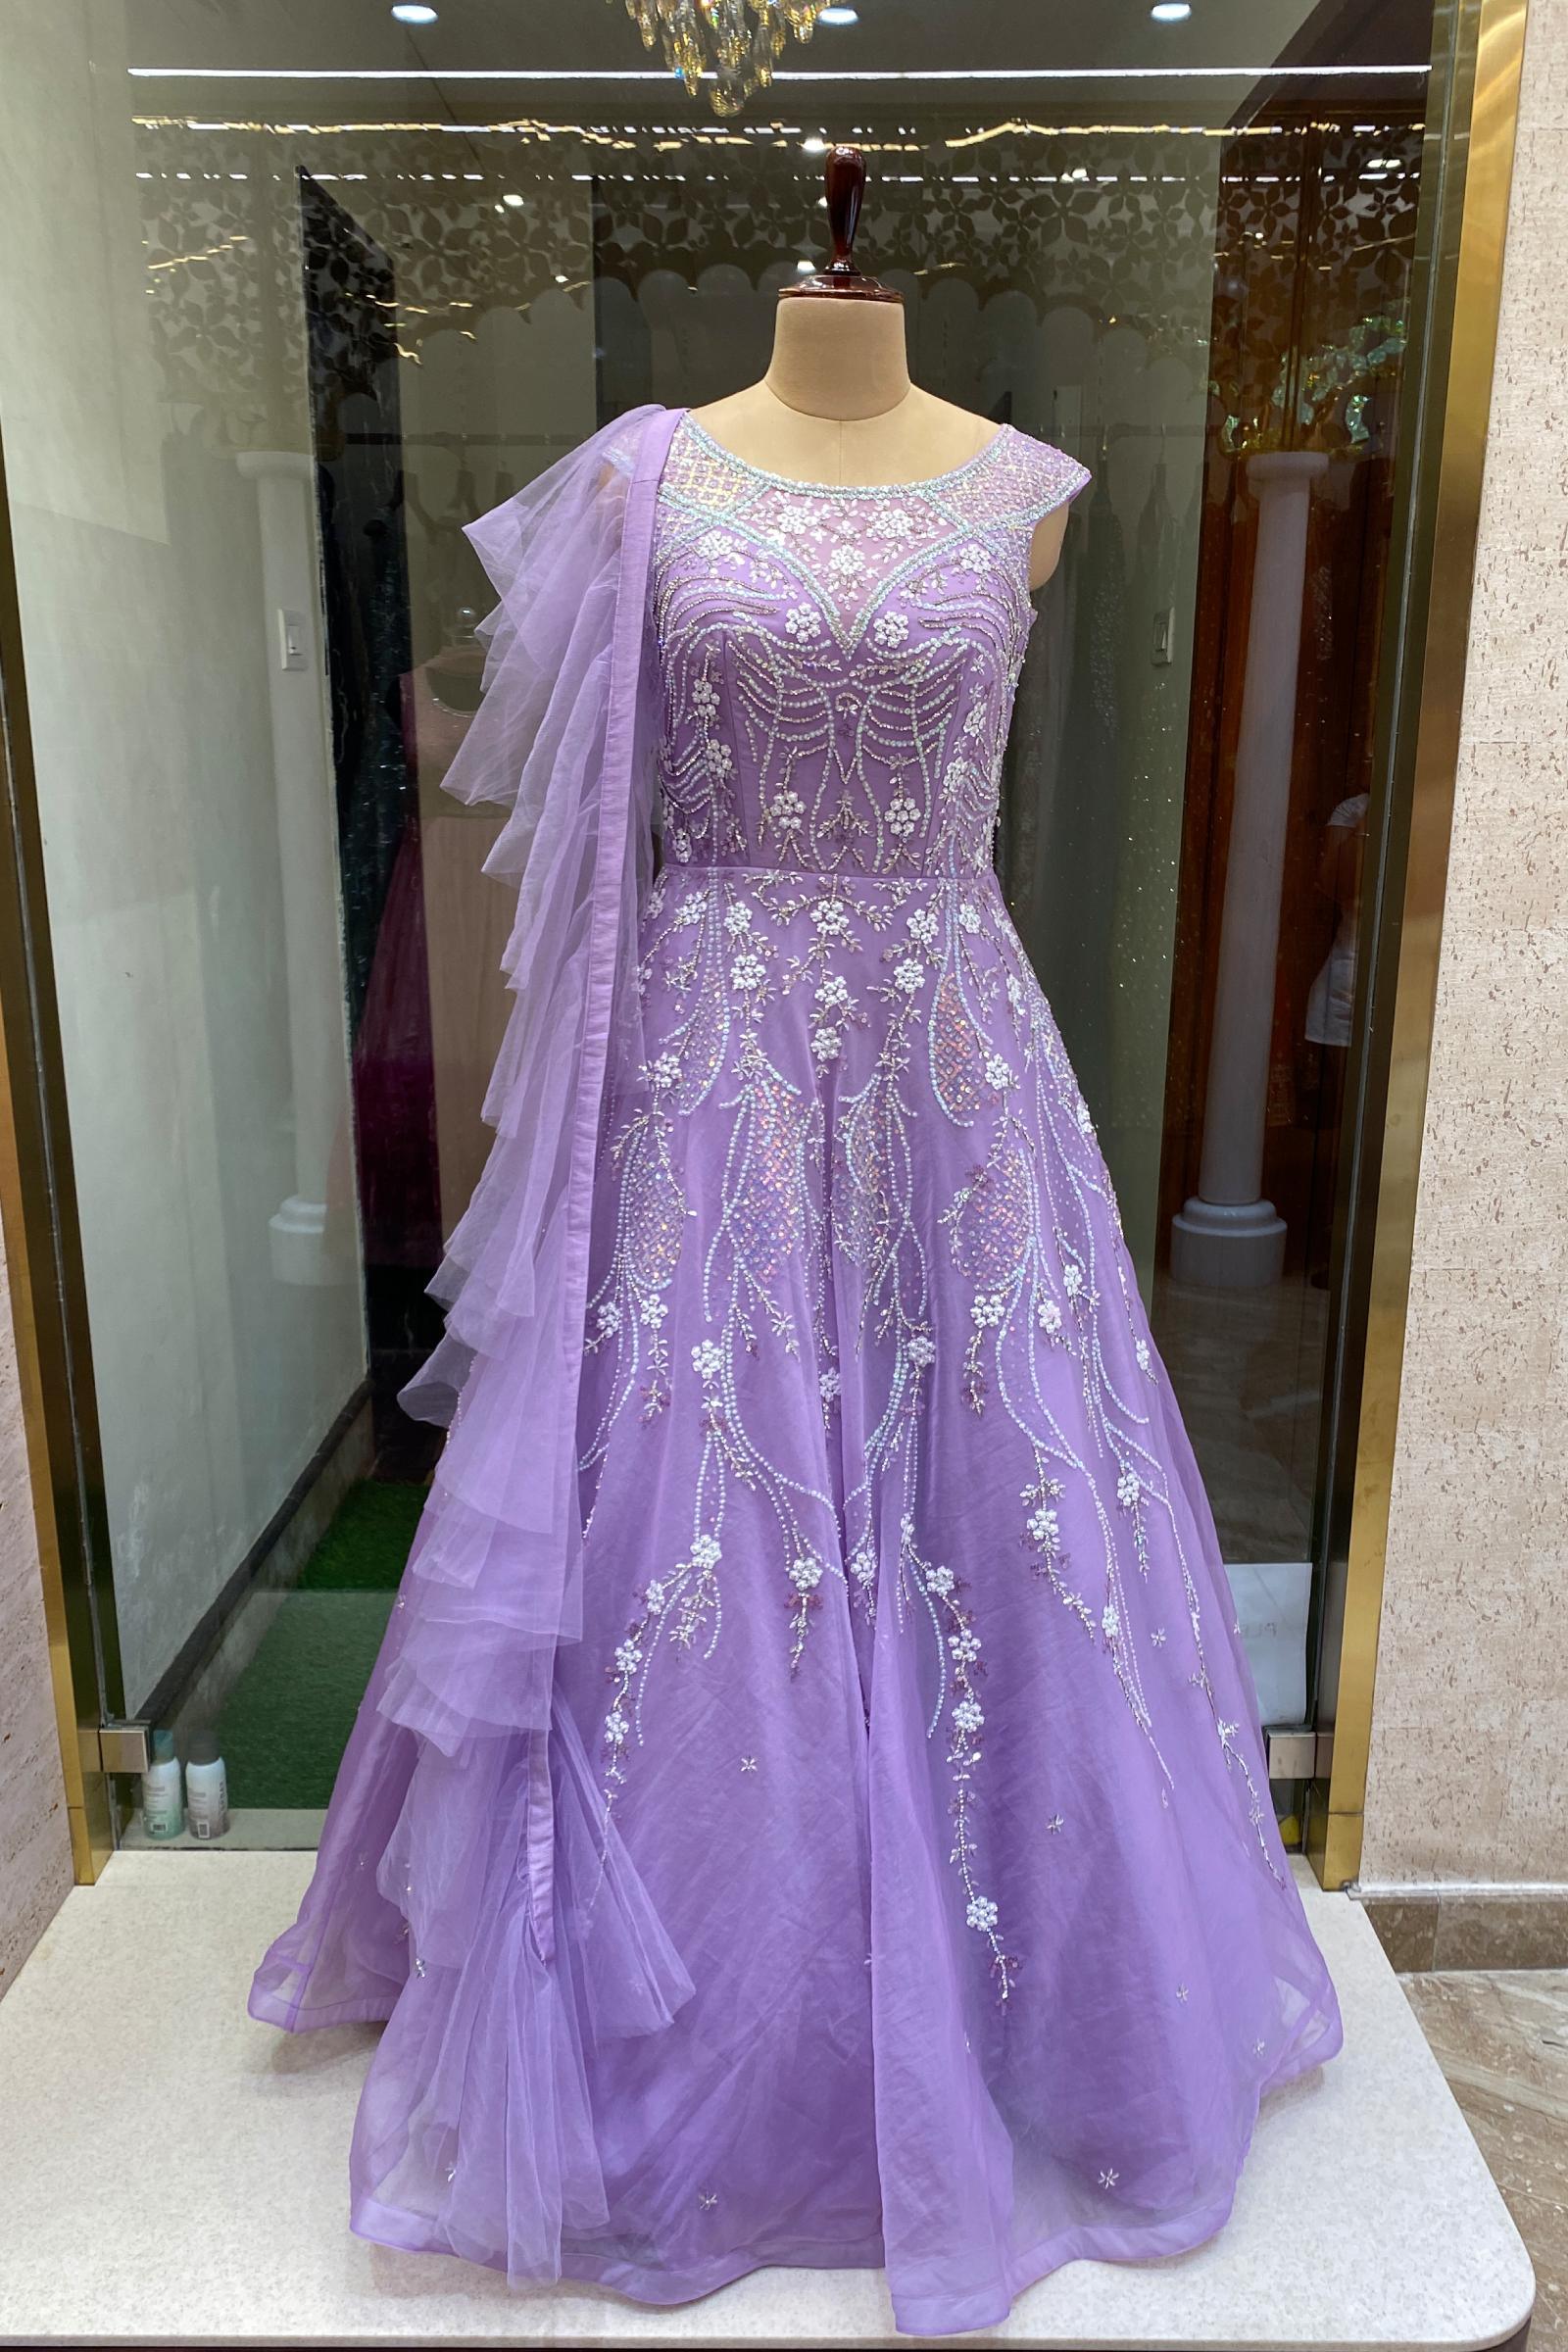 6 Stores for Wedding Gowns in Chennai to Live Your Fairytale